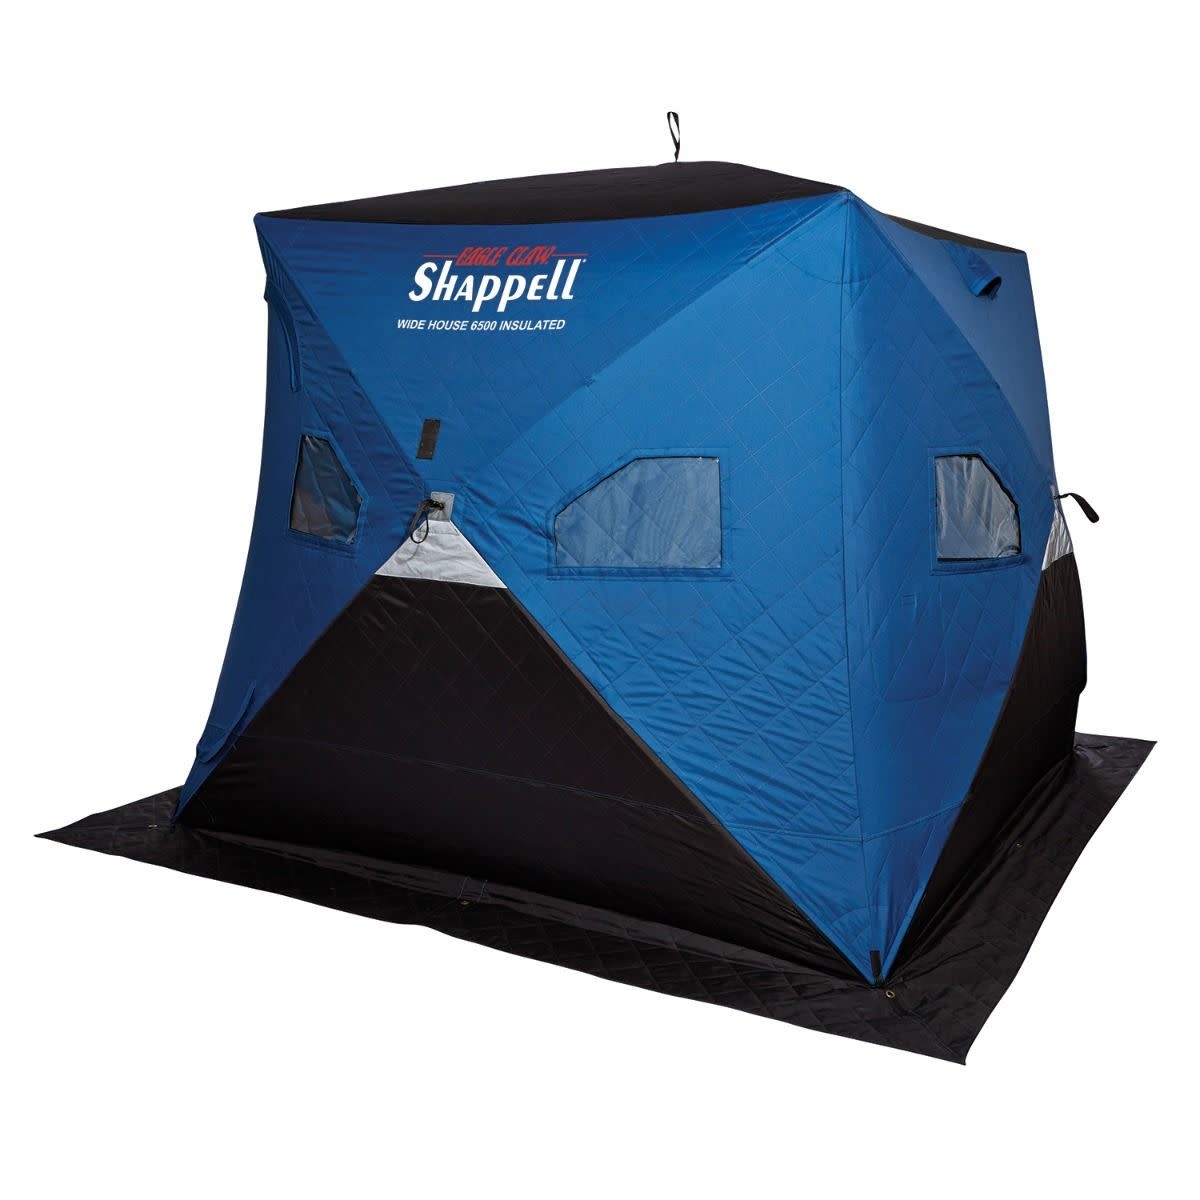 Shappell Wide House 6500 Insulated Hub Ice Shelter